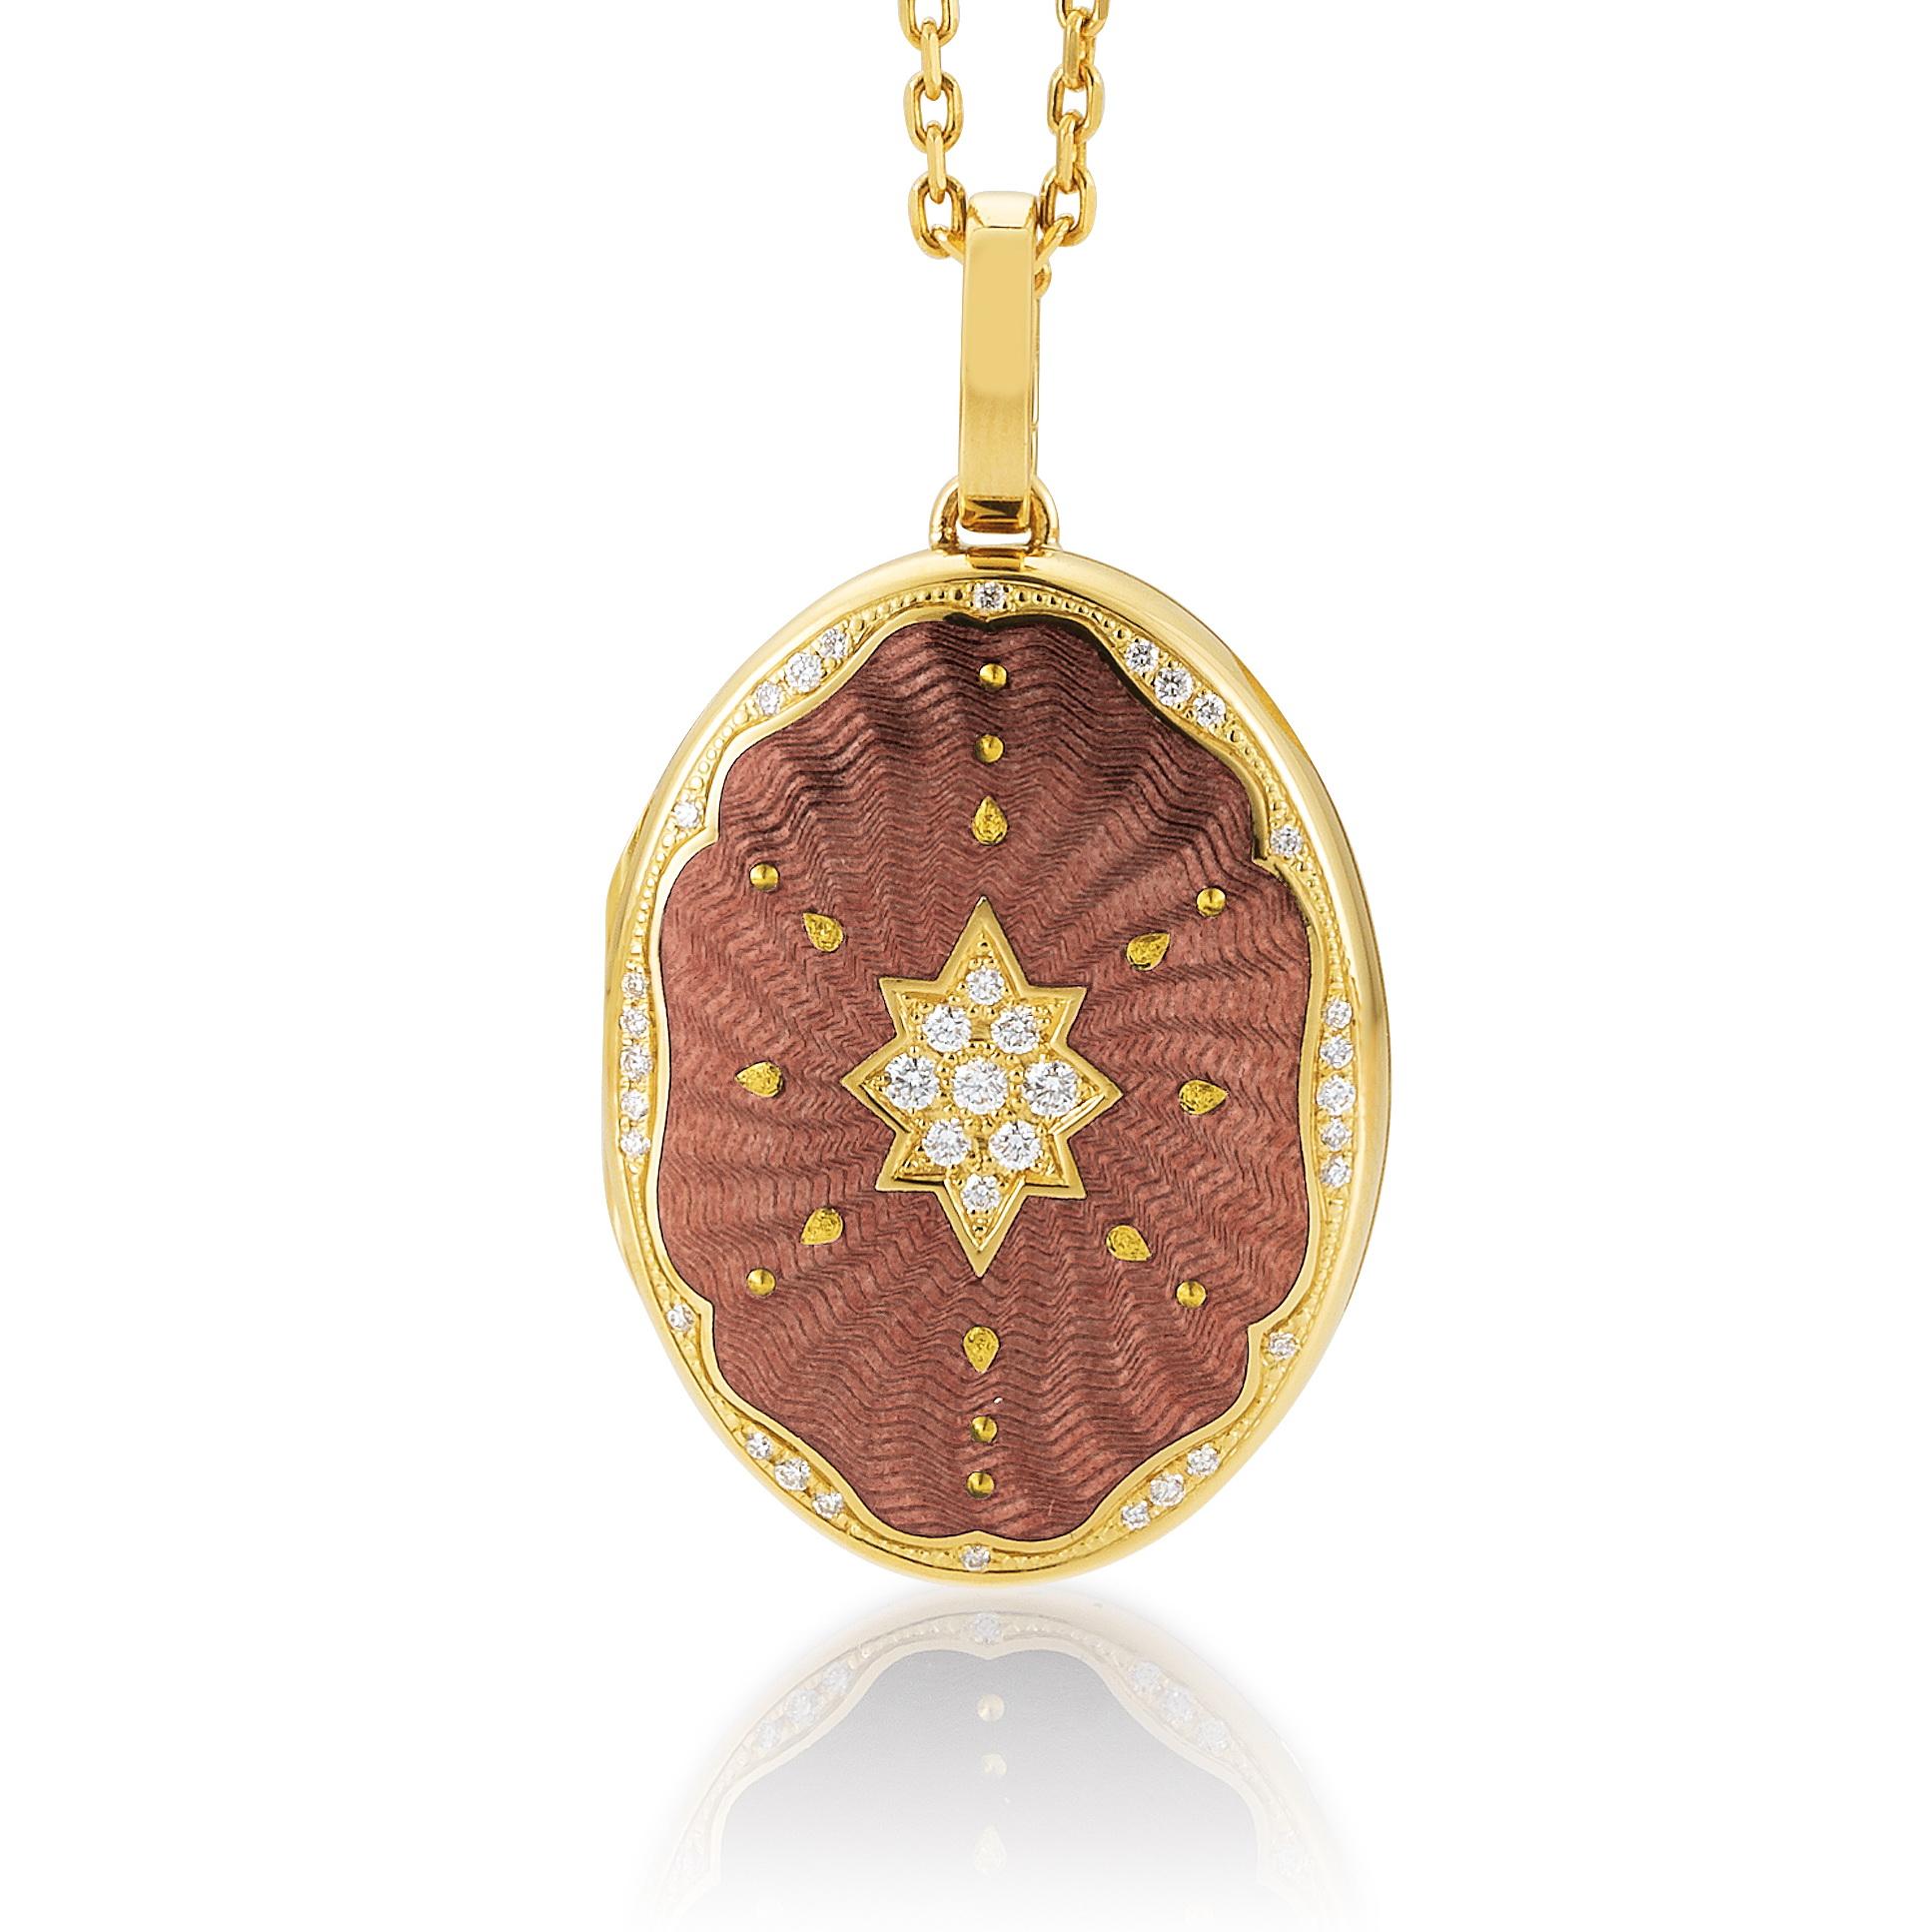 Victor Mayer oval locket pendant 18k yellow gold, Victoria collection, translucent dusky pink vitreous enamel, gold paillons, 37 diamonds, total 0.29 ct, G VS, brilliant cut, measurements app. 25 mm x 35 mm

About the creator Victor Mayer
Victor